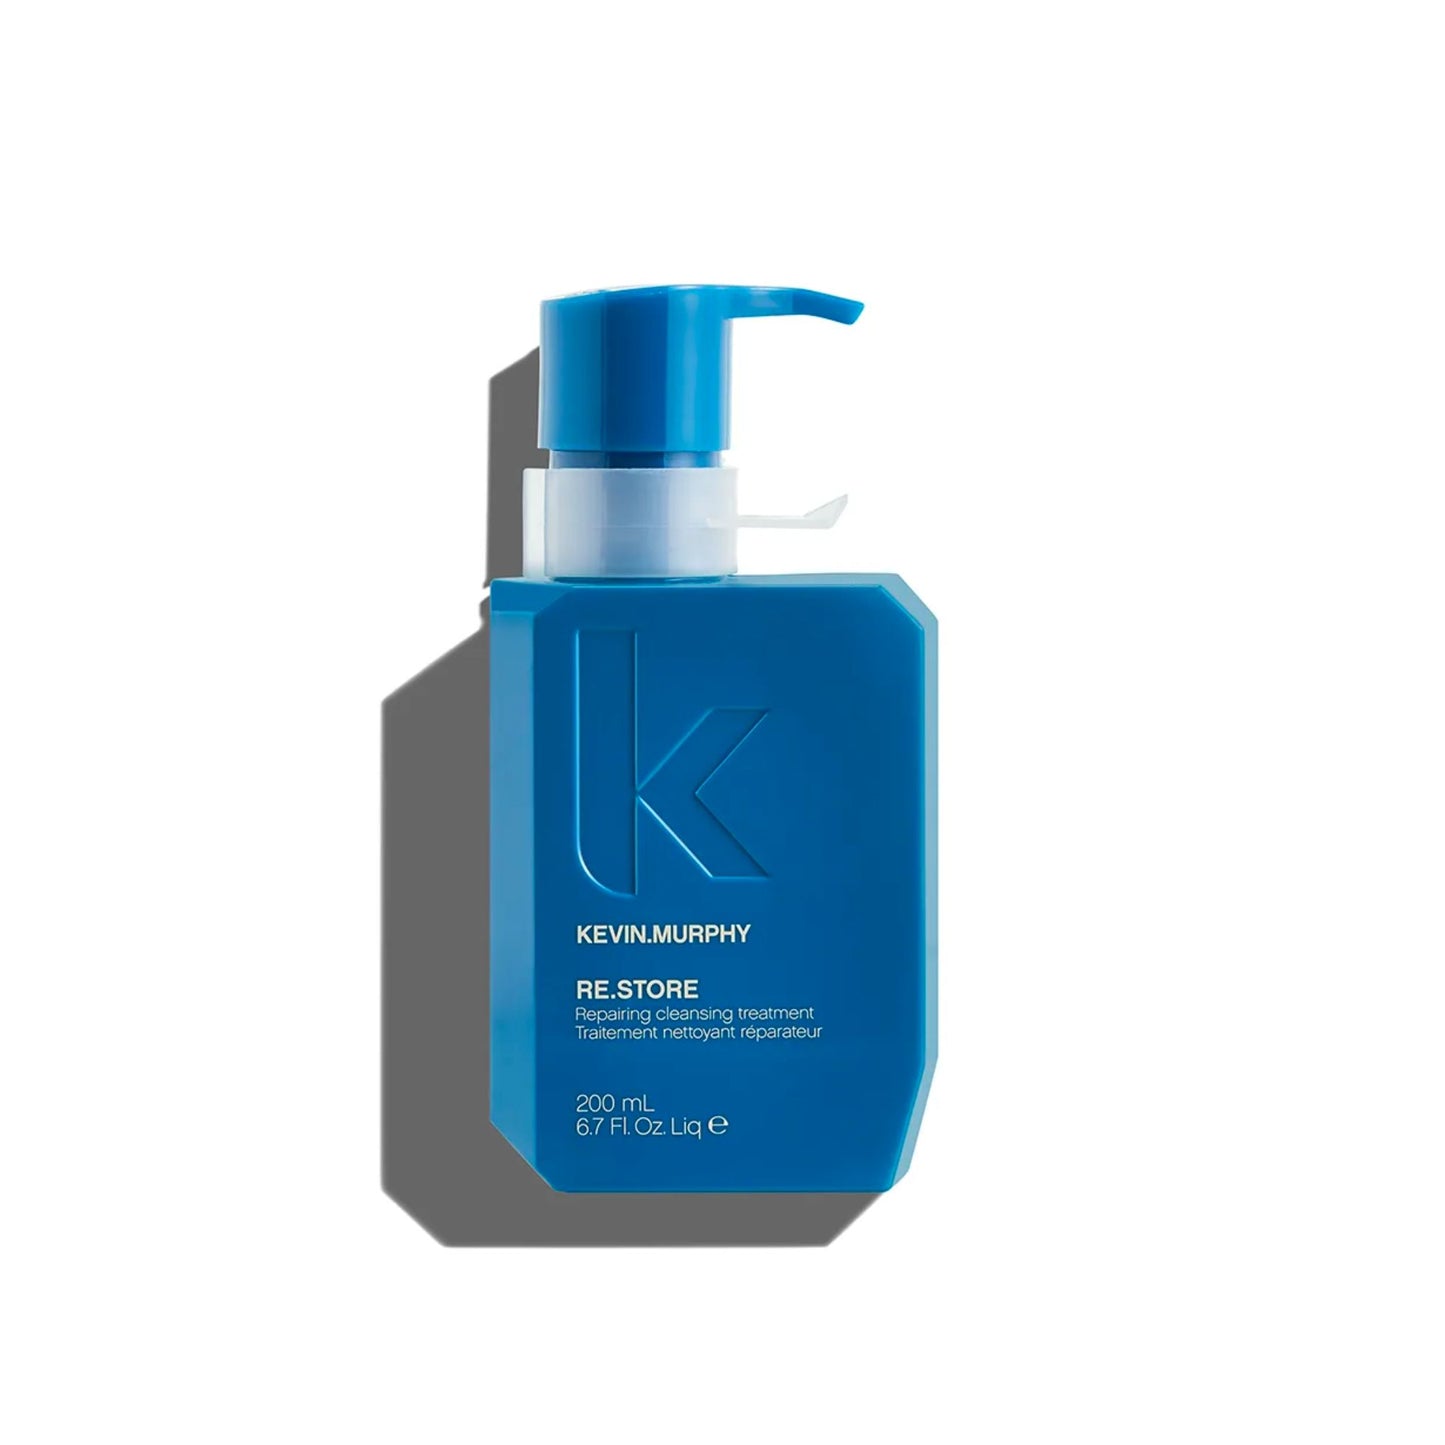 RE.STORE - Revitalizing Cleansing Care - 200ml